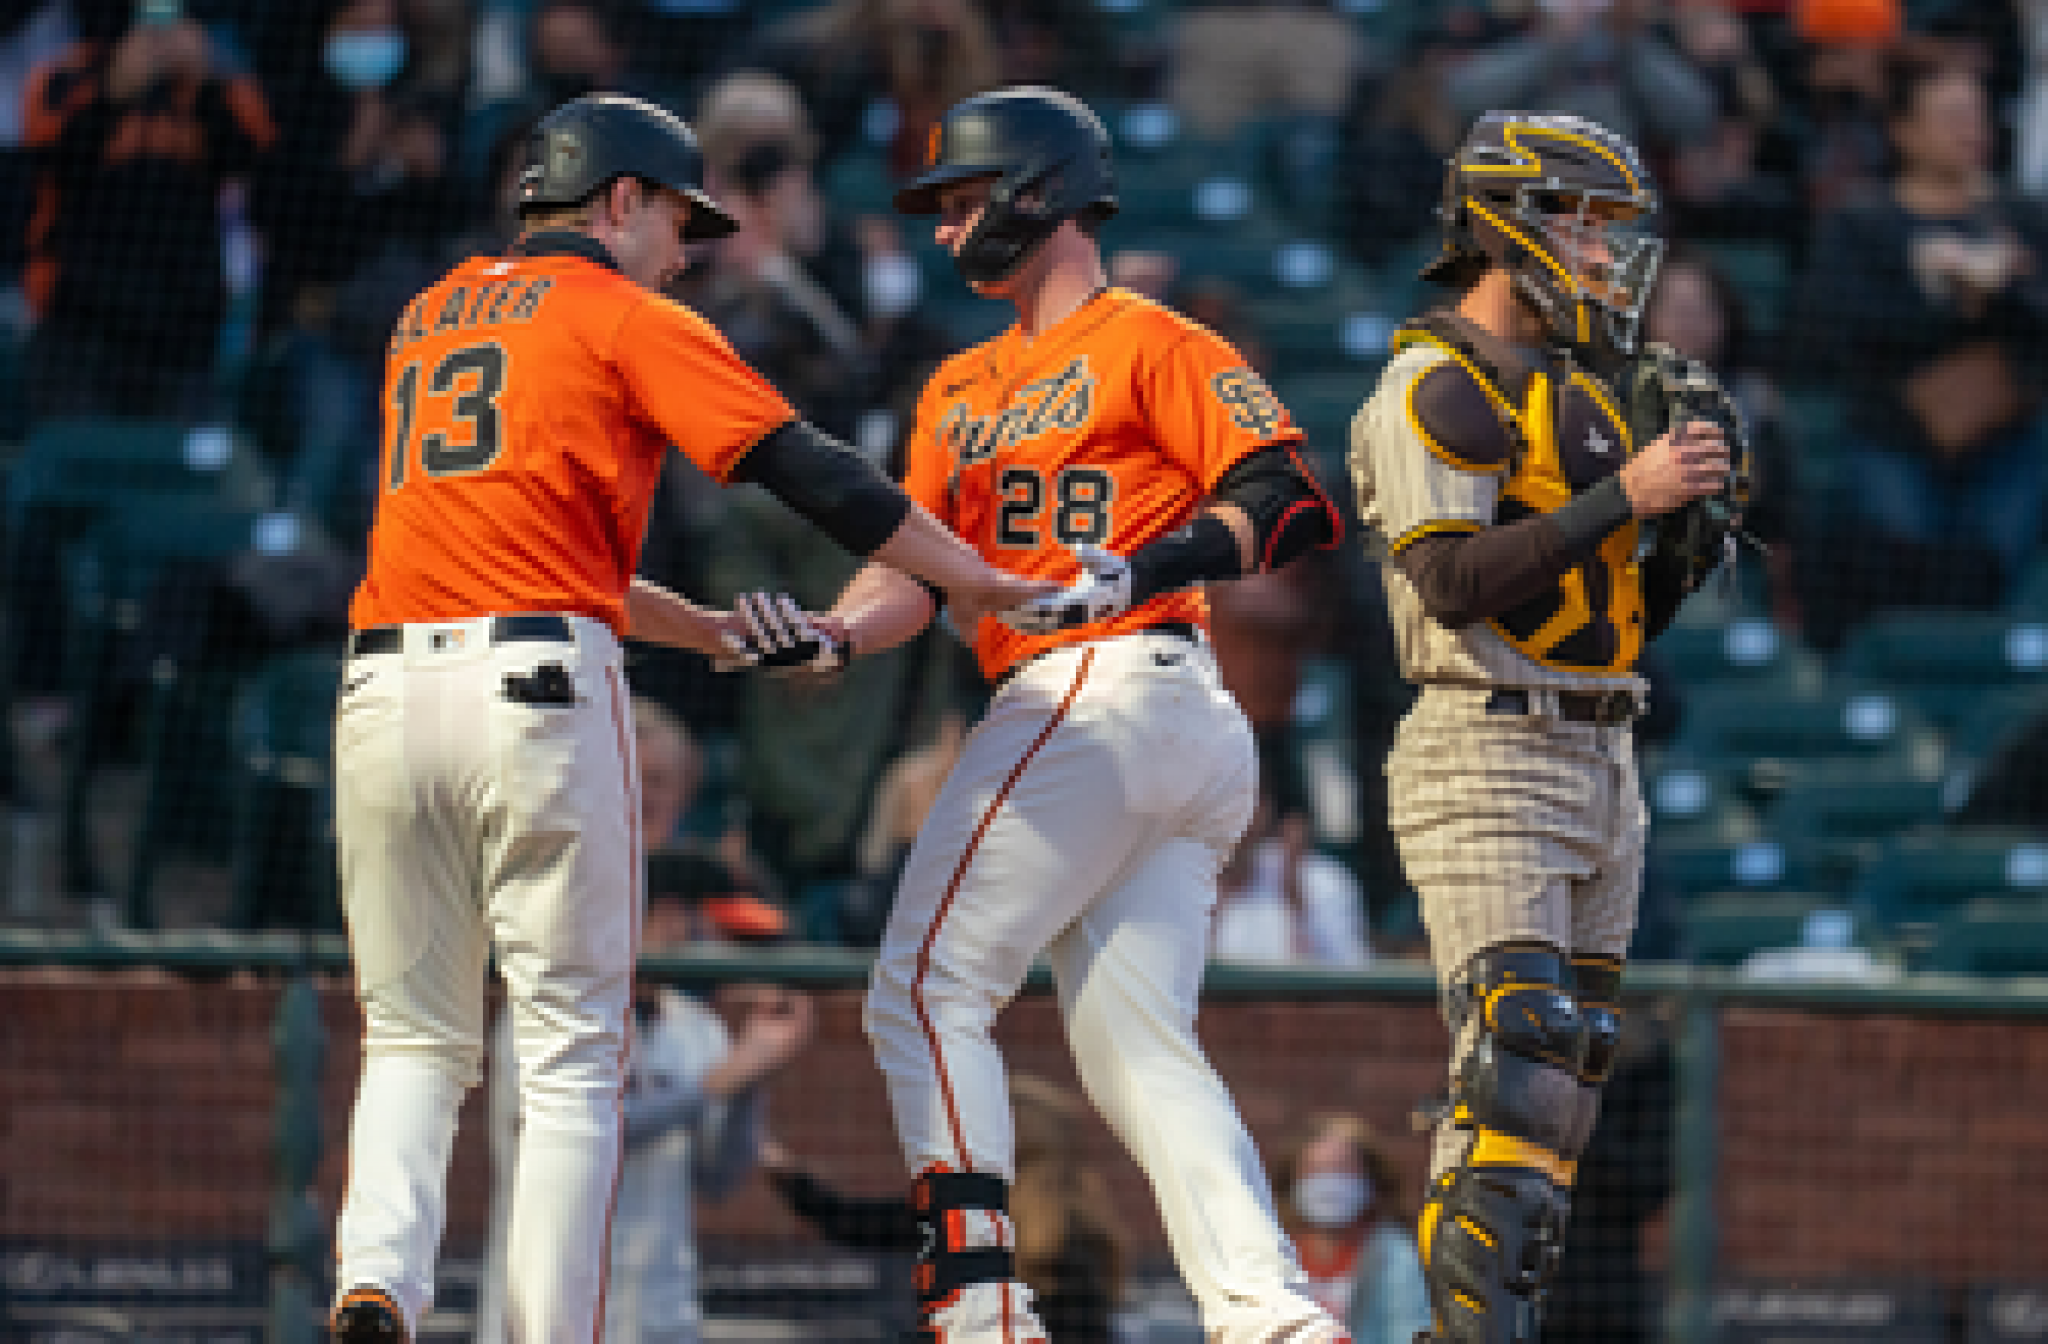 Austin Slater’s late homer gives Giants 5-4 win over Padres